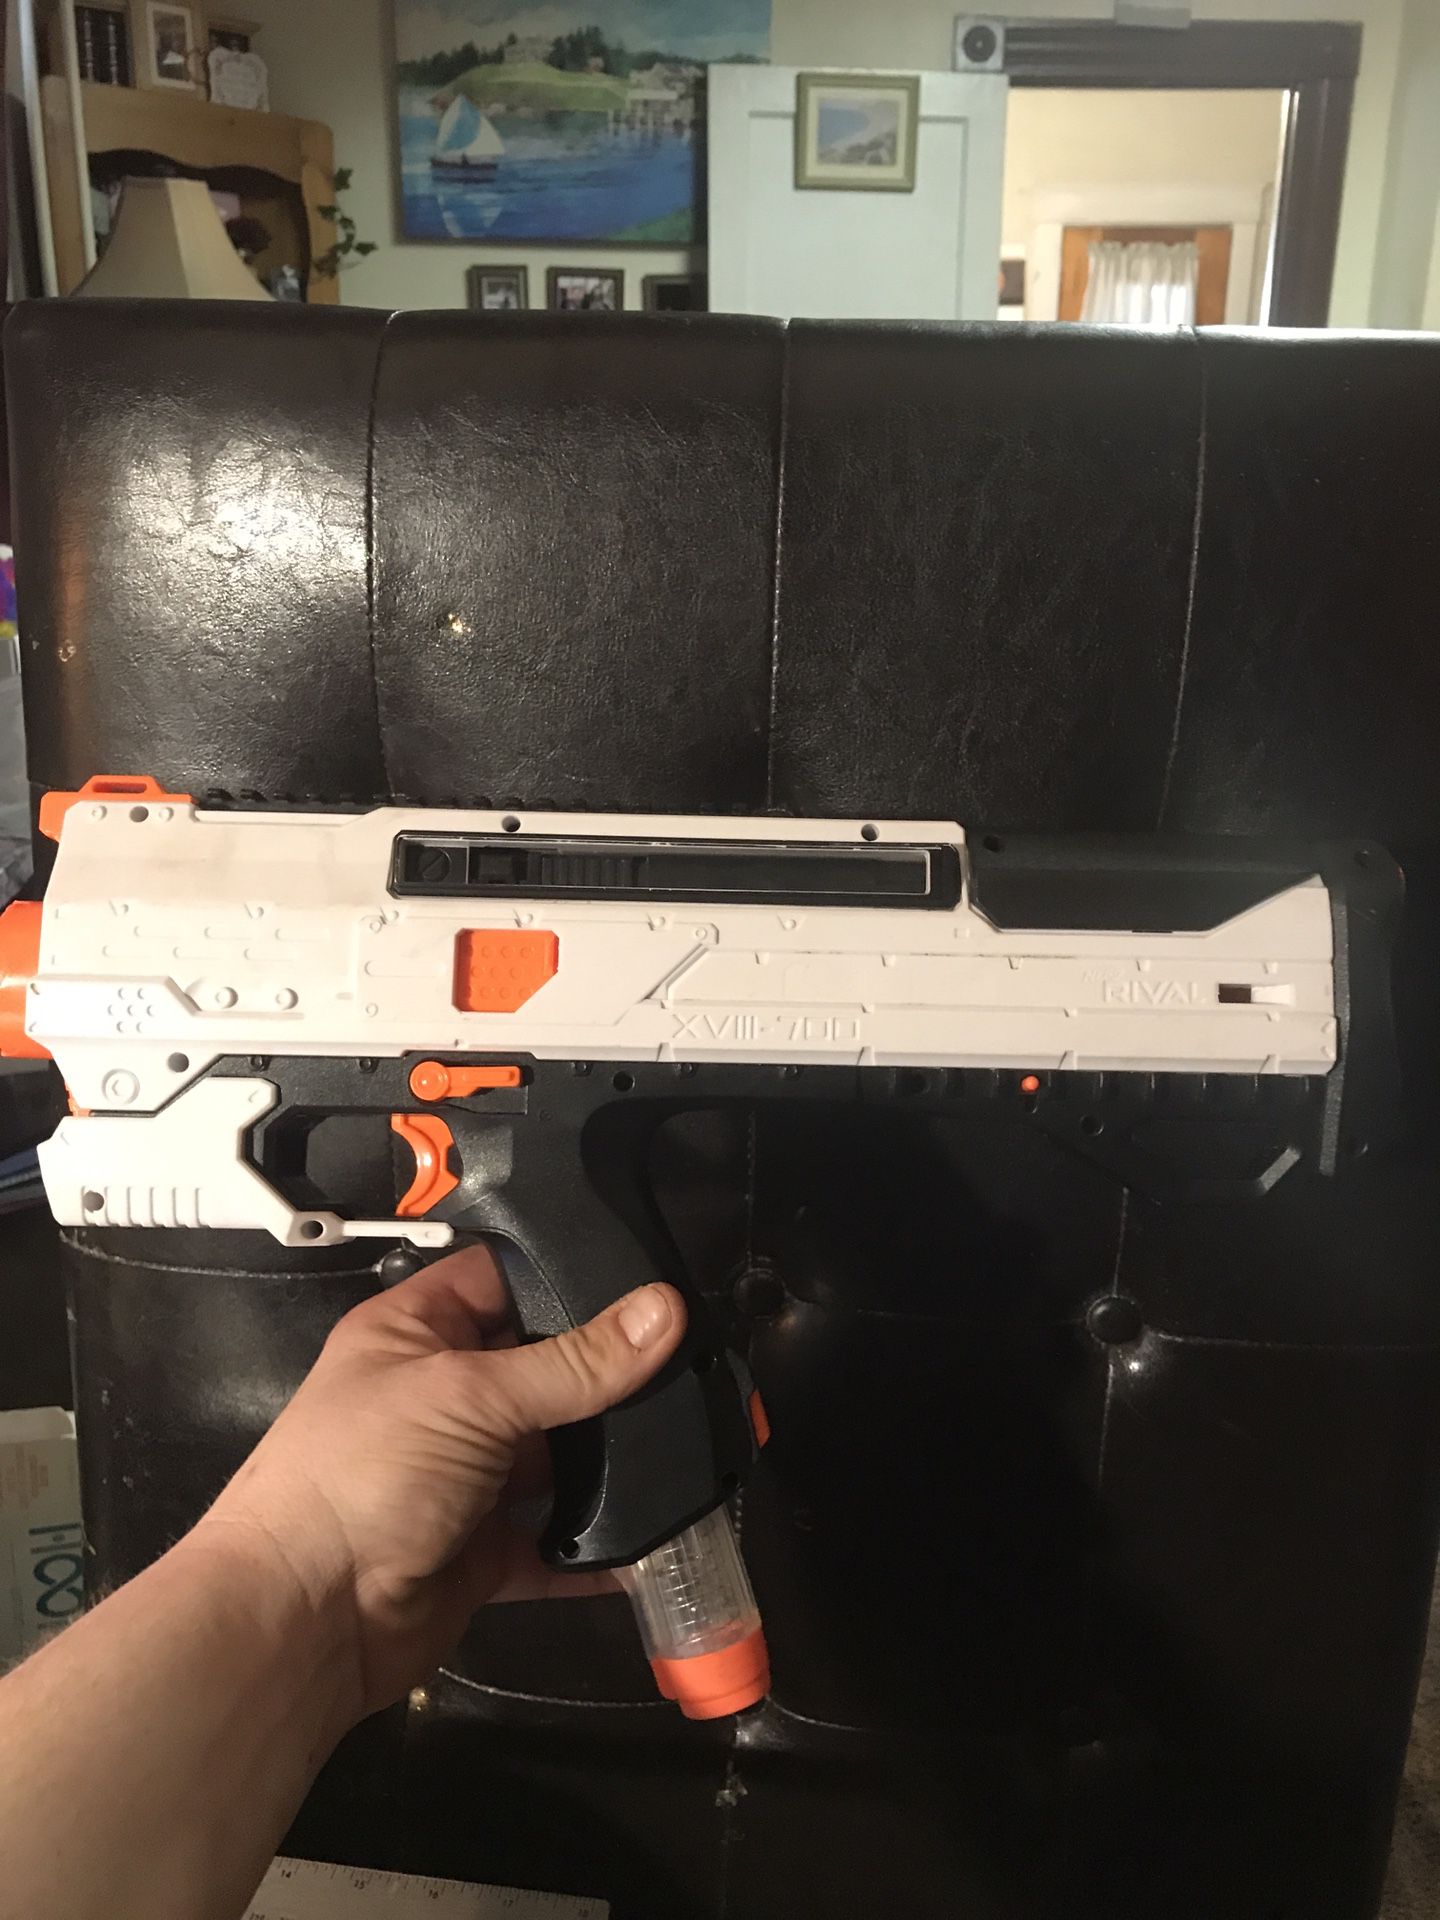 Nerf Rival Gun And Ammo